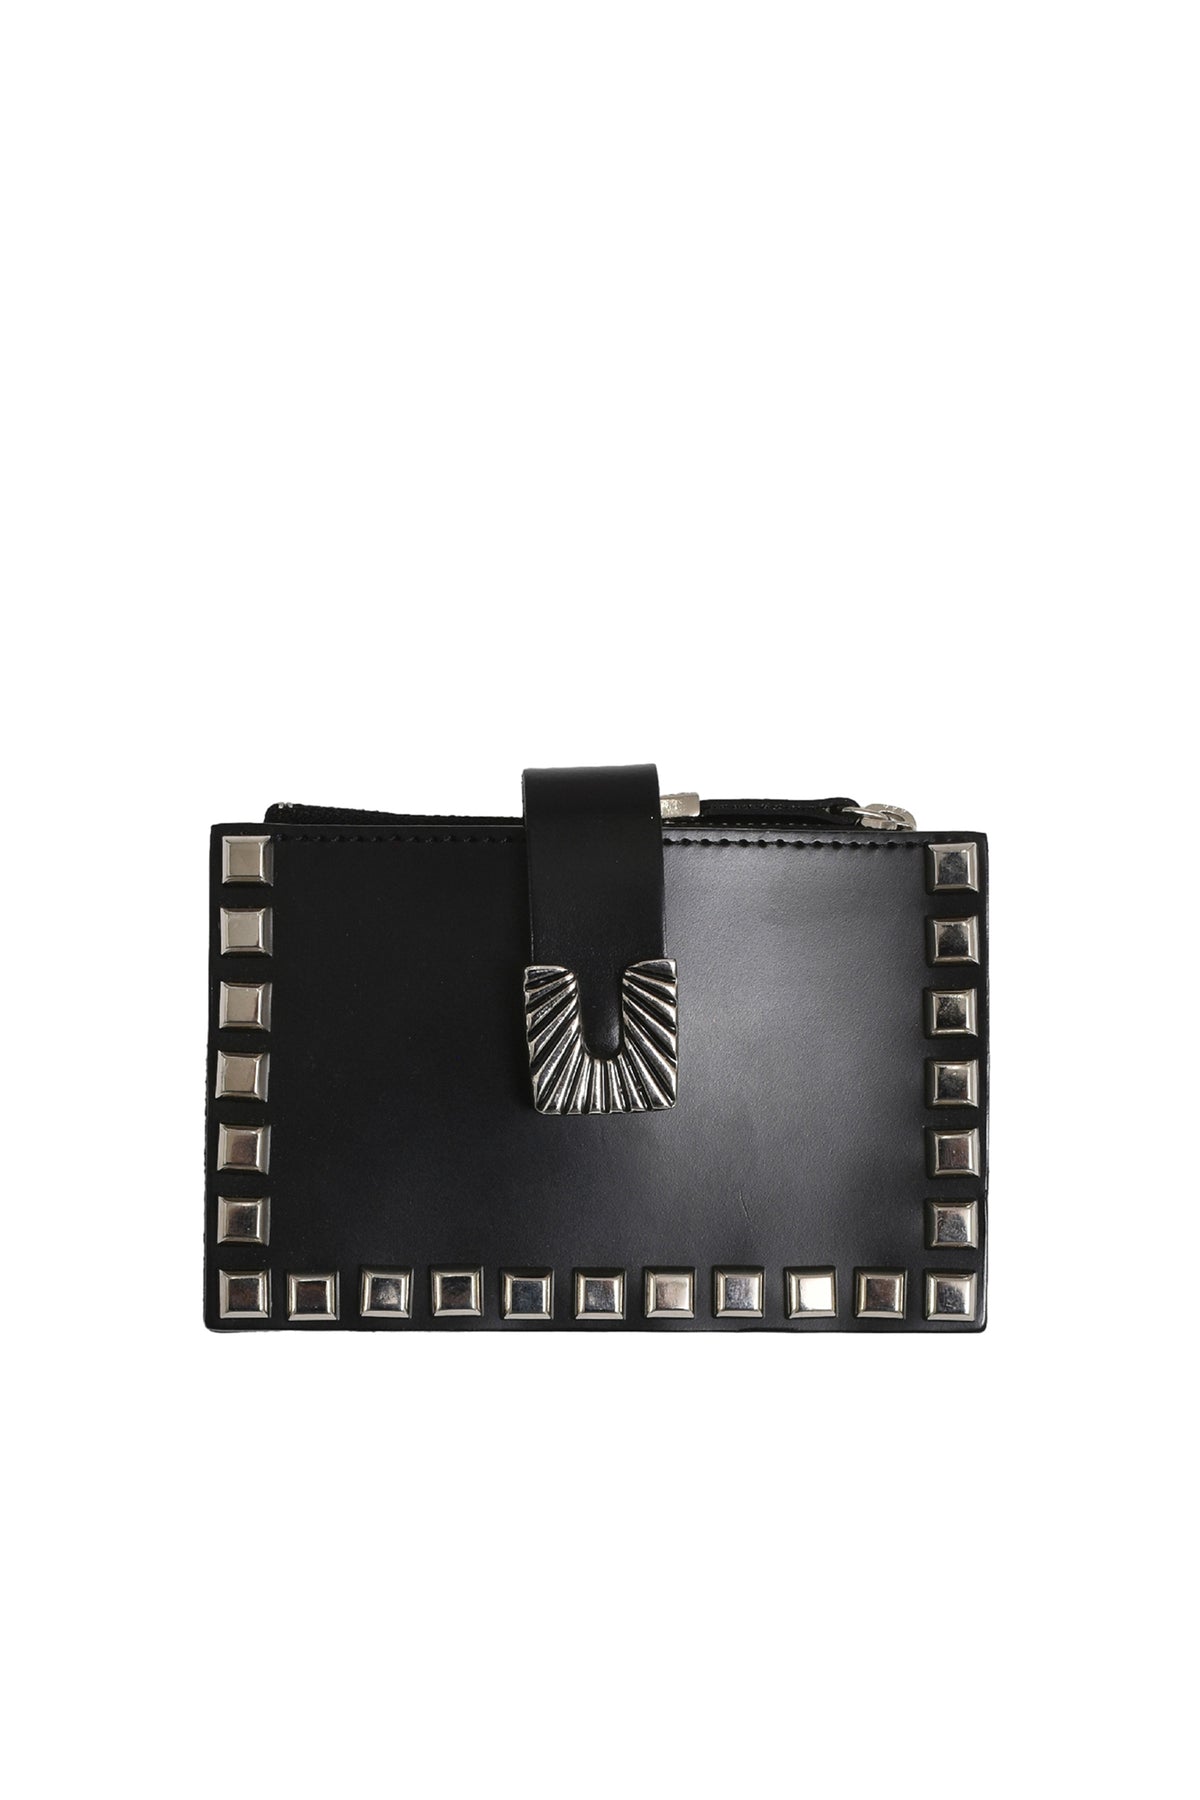 LEATHER WALLET STUDS SMALL / BLK